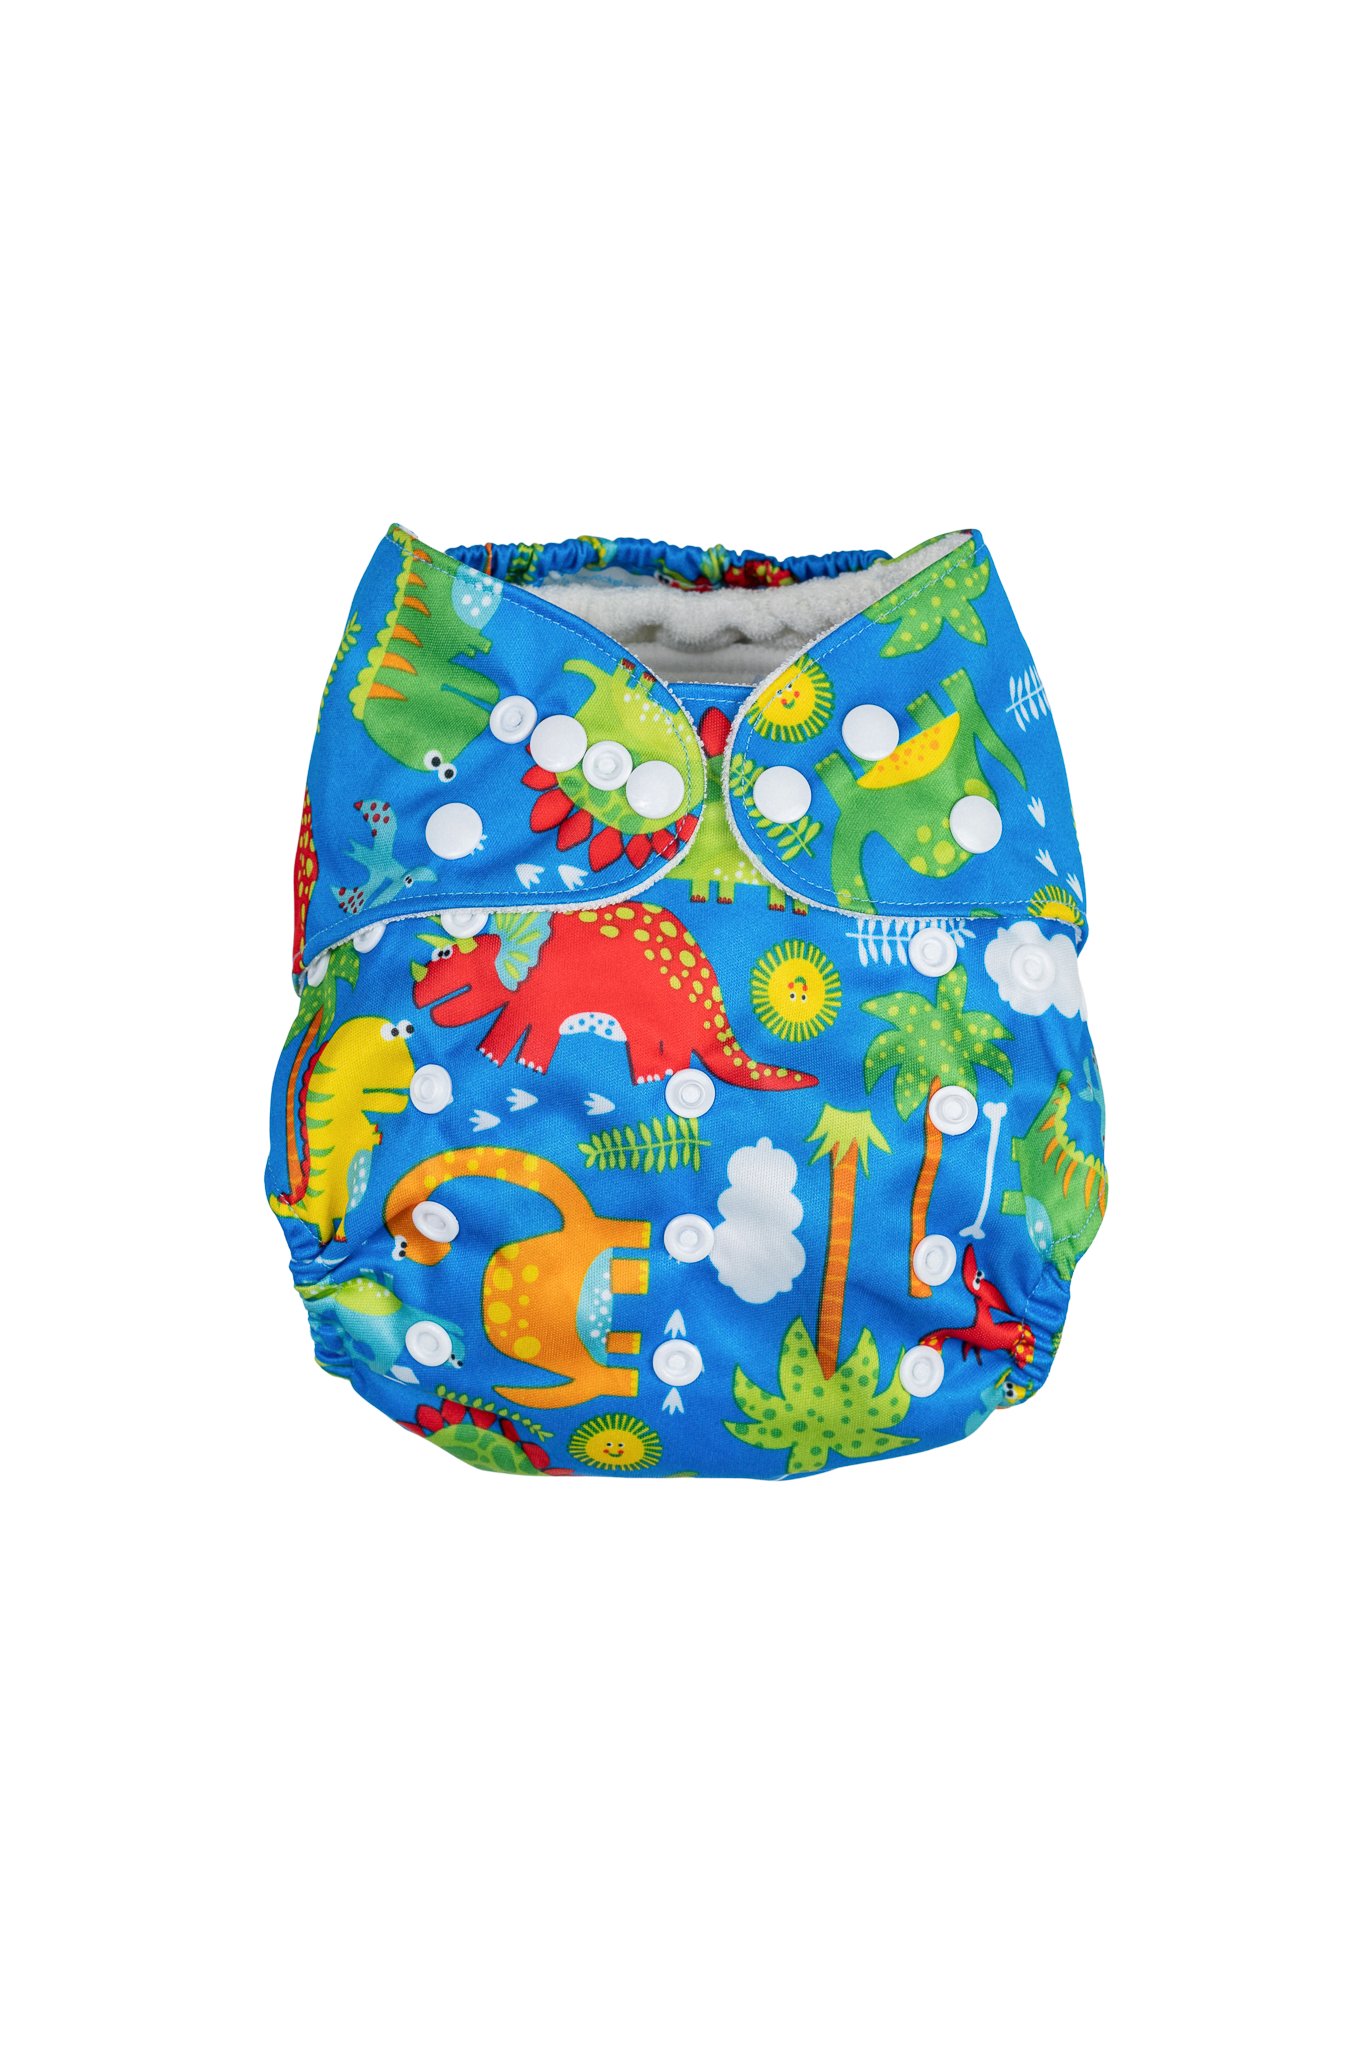 Bamboo Size-Adjustable Cloth Nappy - Dinosaur Expedition,Bamboo Size-Adjustable Cloth Nappy - Dinosaur Expedition